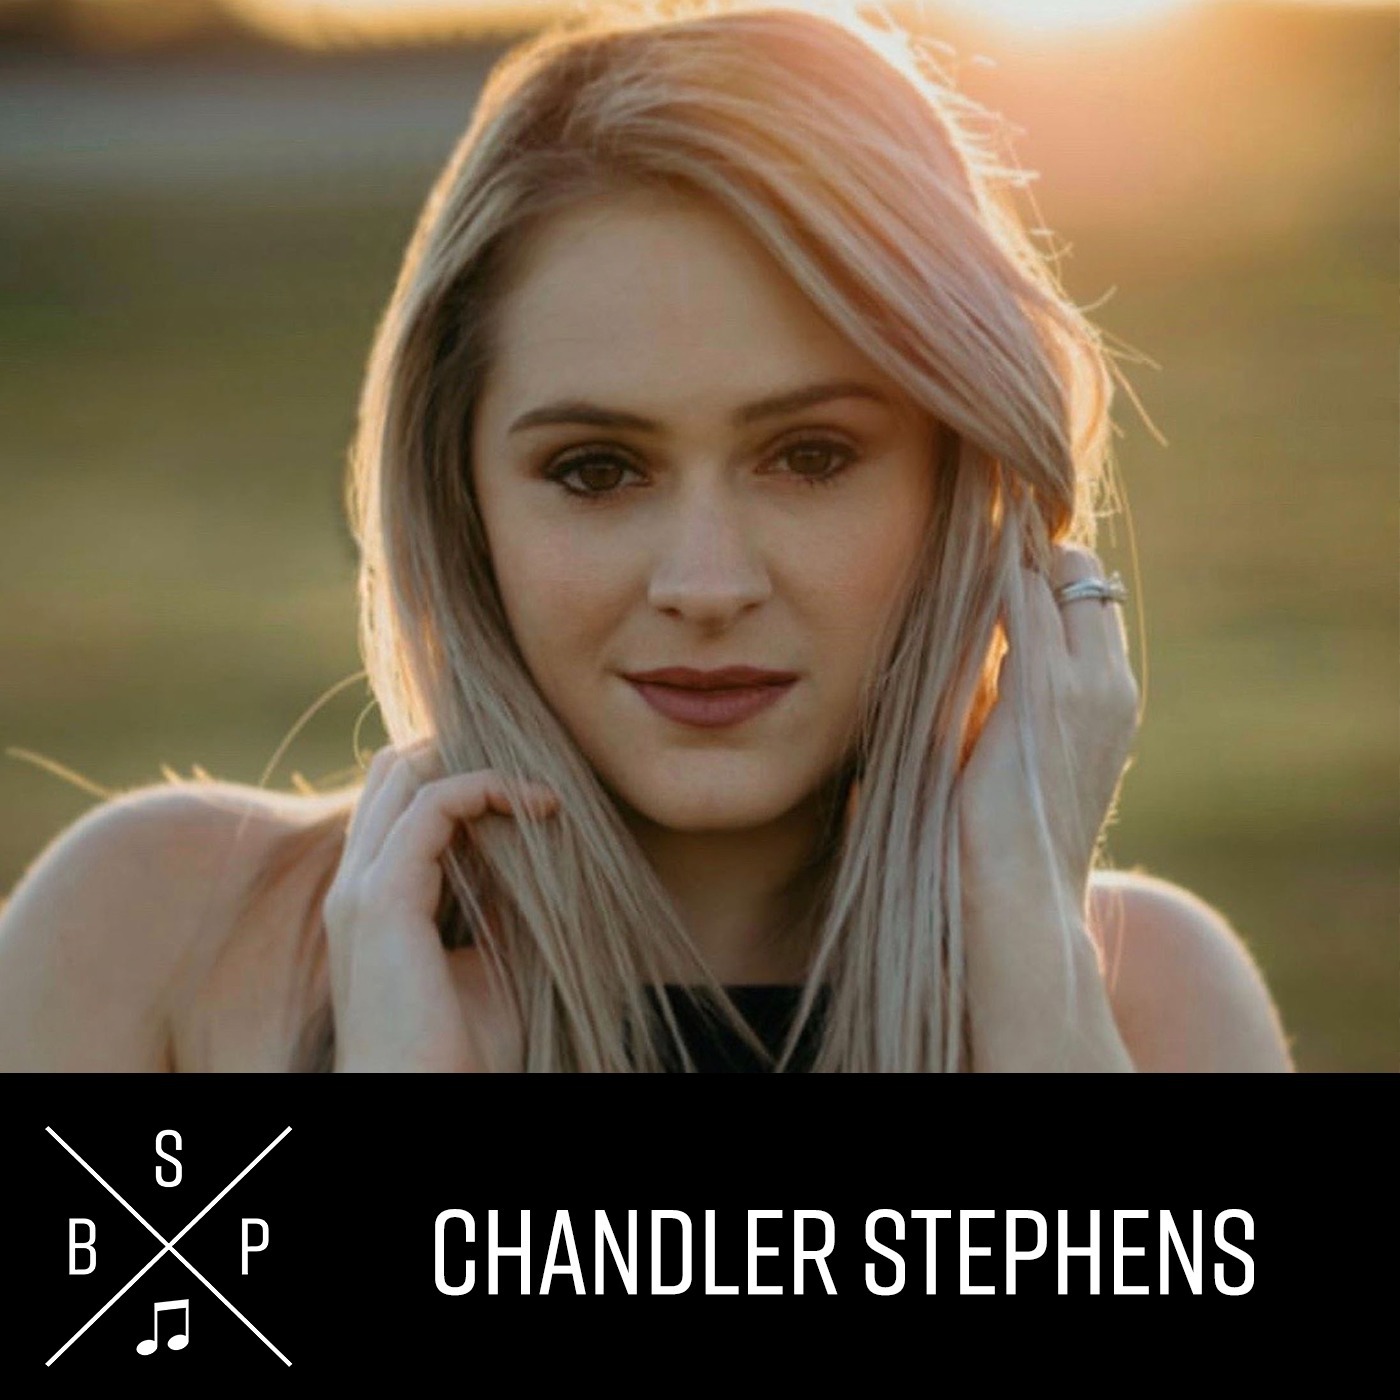 Can't Stop Love by Chandler Stephens and Kane Brown